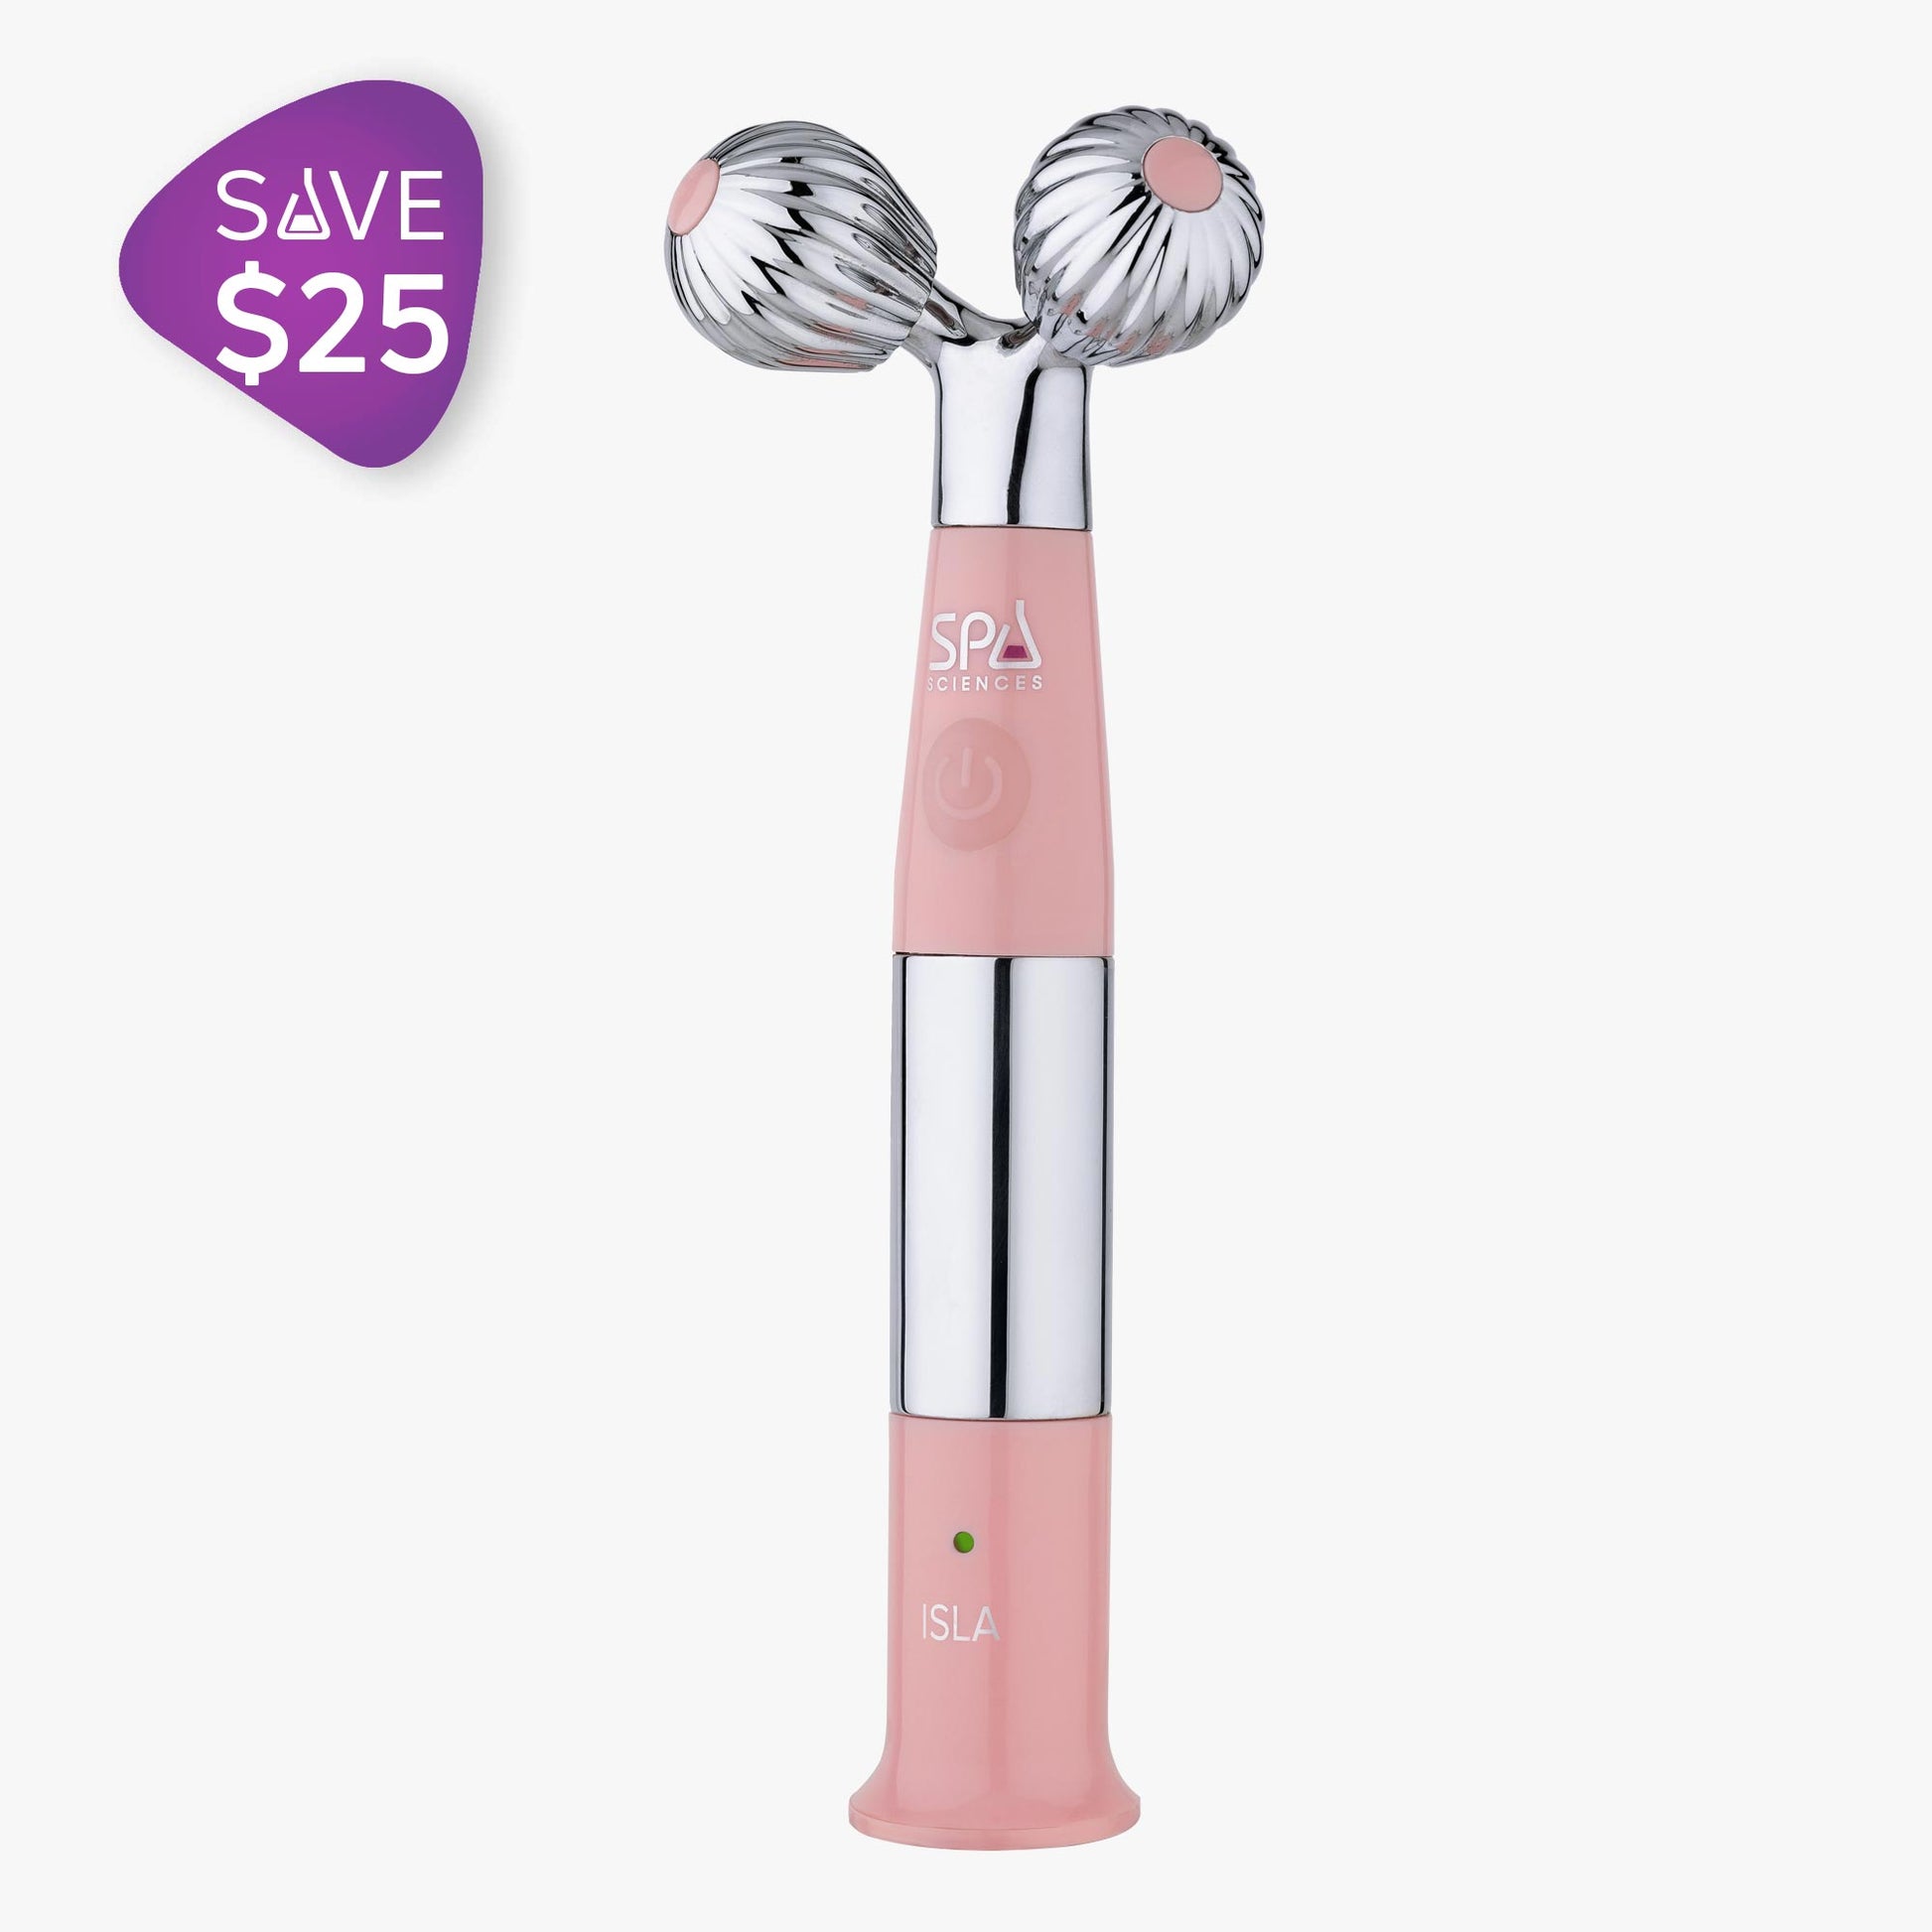 A pink and silver Plump It facial massager by Spa Sciences with a price tag.